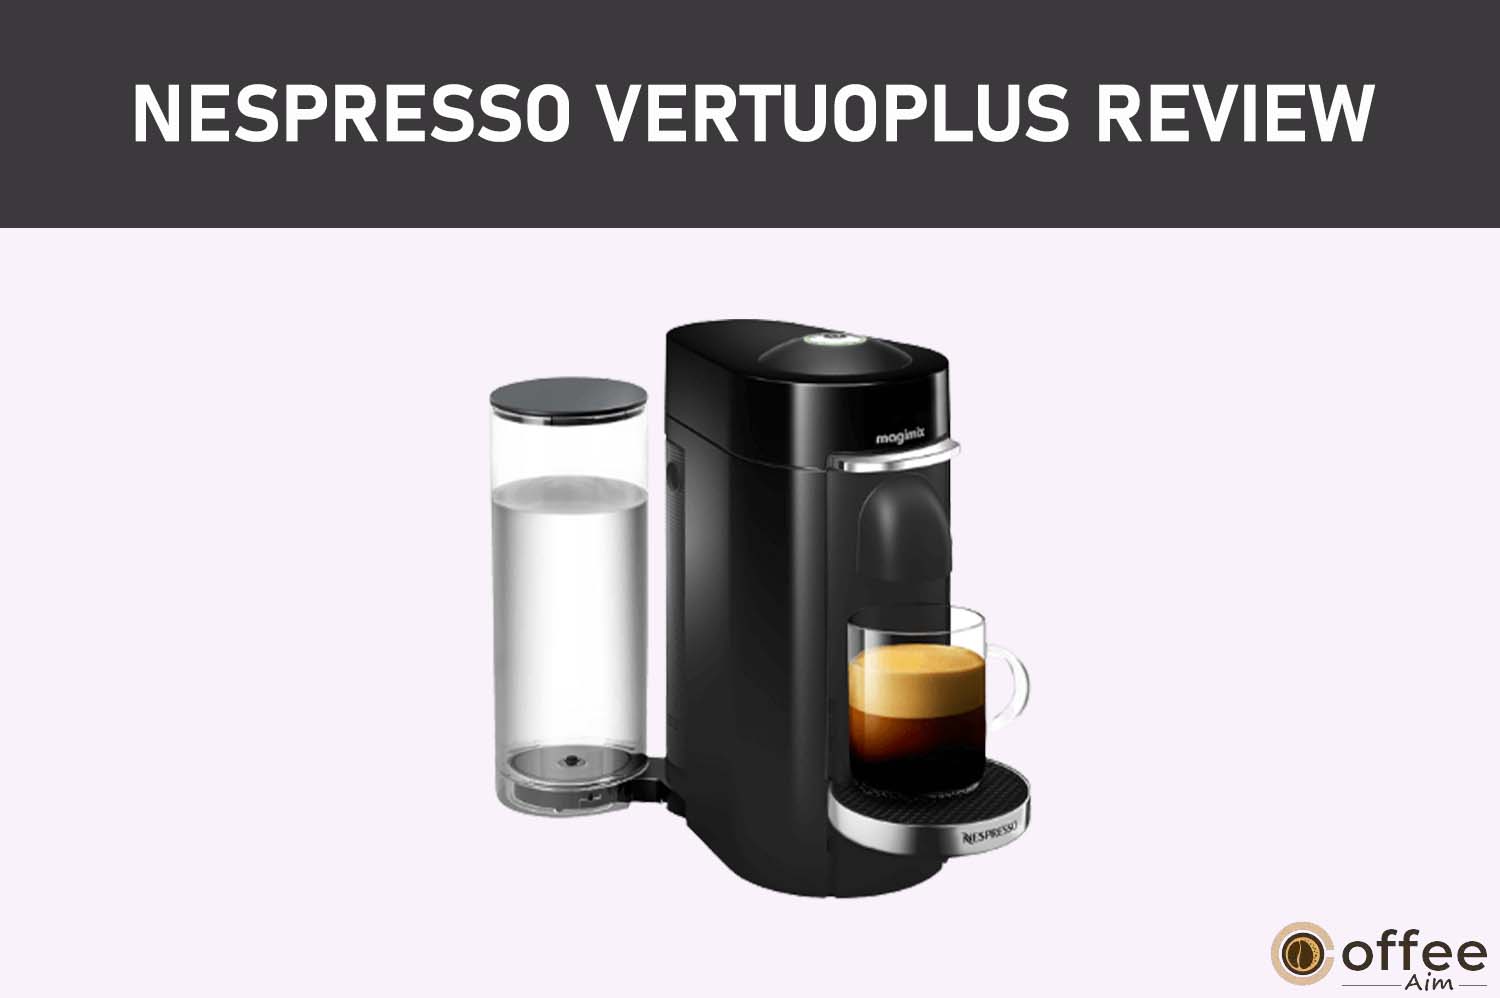 Featured image for the article "Nespresso VertuoPlus Review"